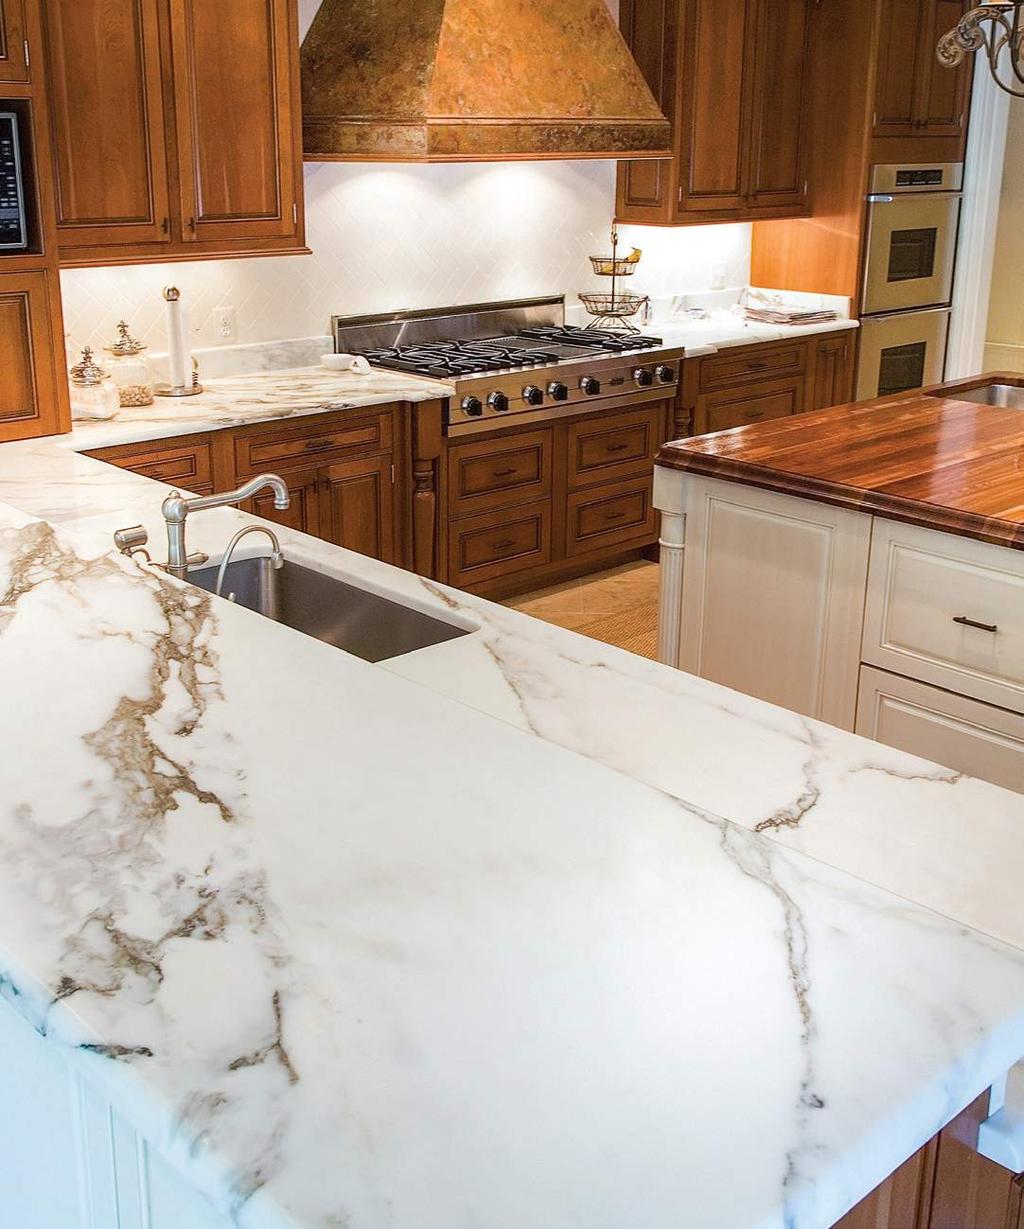 Custom Natural Stone & Quartz Surfaces A&S specializes in